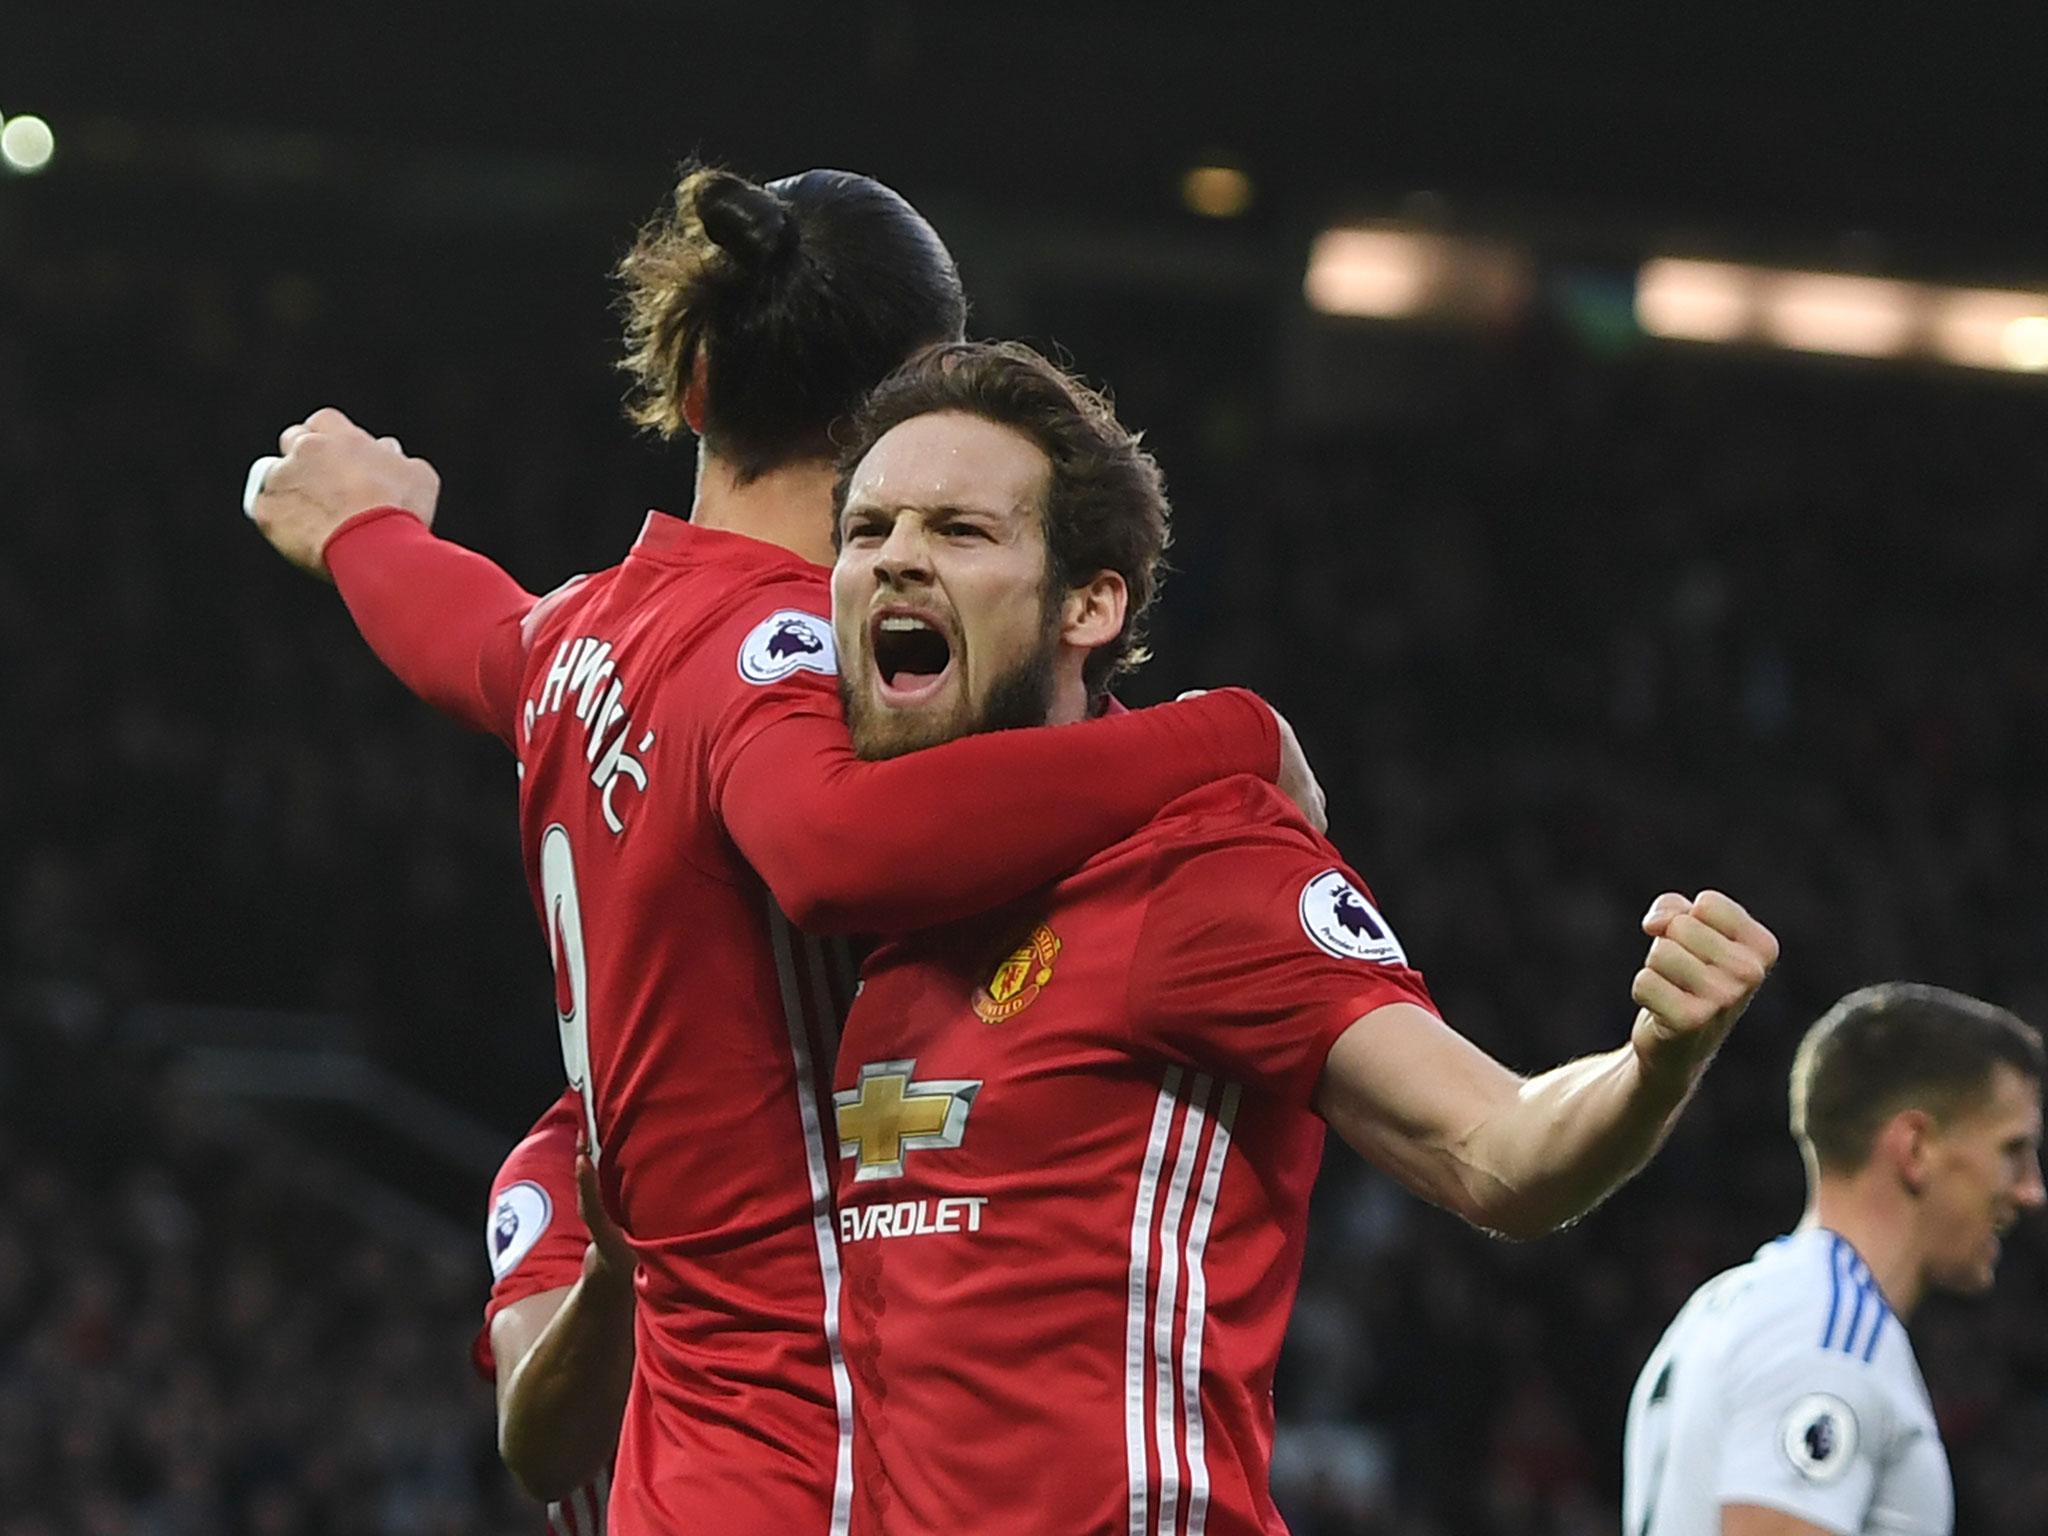 Daley Blind believes Manchester United are finding their form at the right time